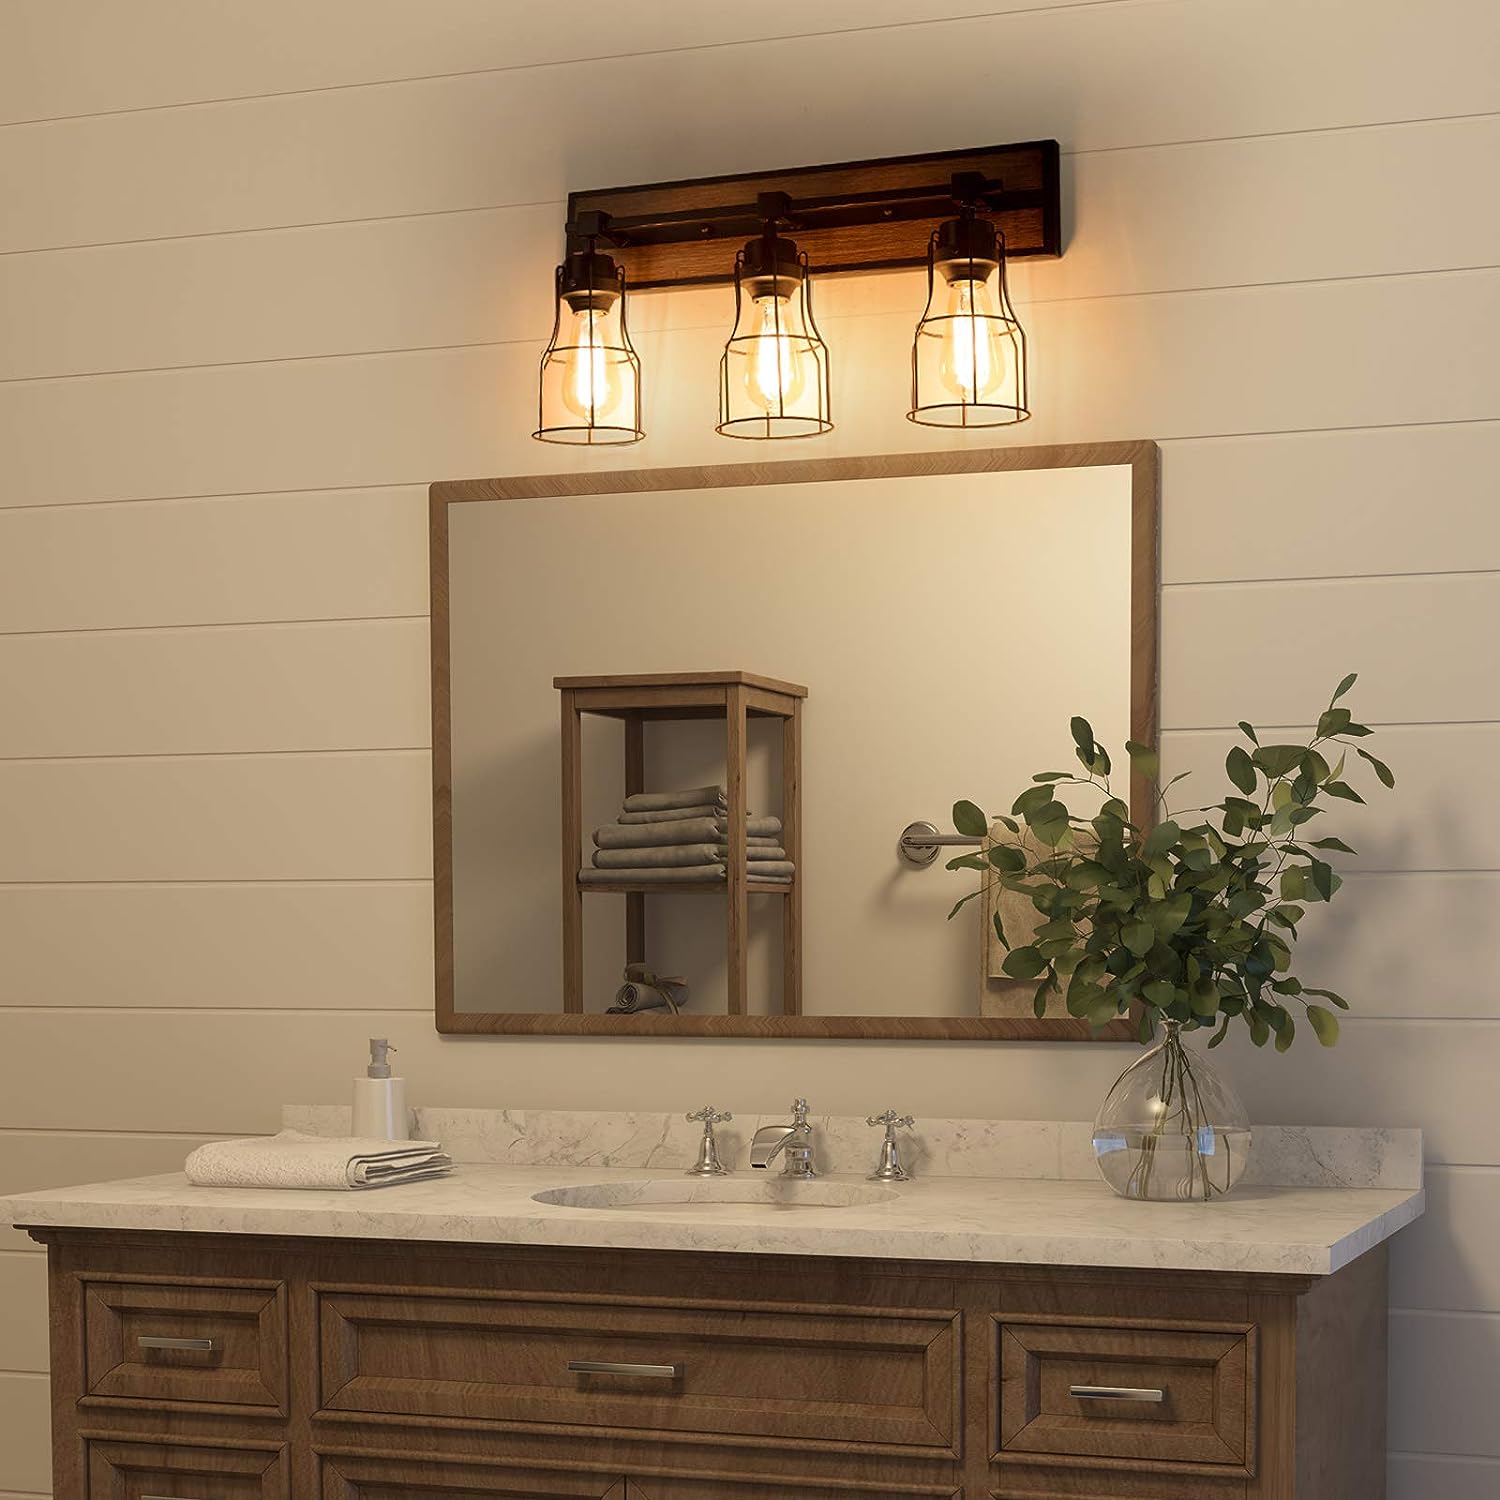 How To Replace Vanity Lights